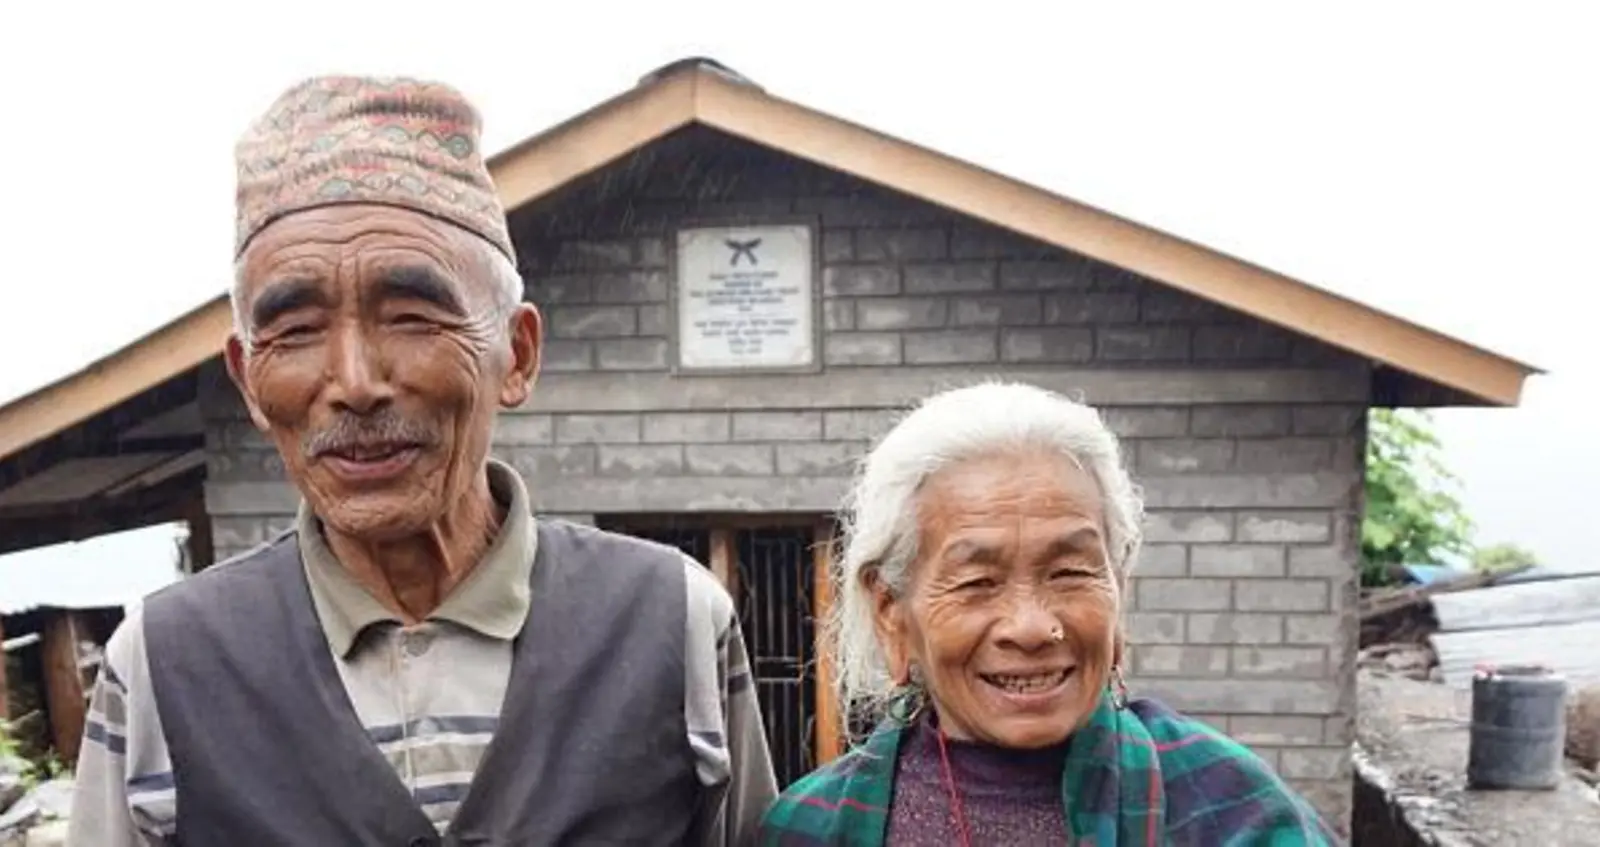  Baldhan and Budhini stood outside their newly build earthquake resistant home